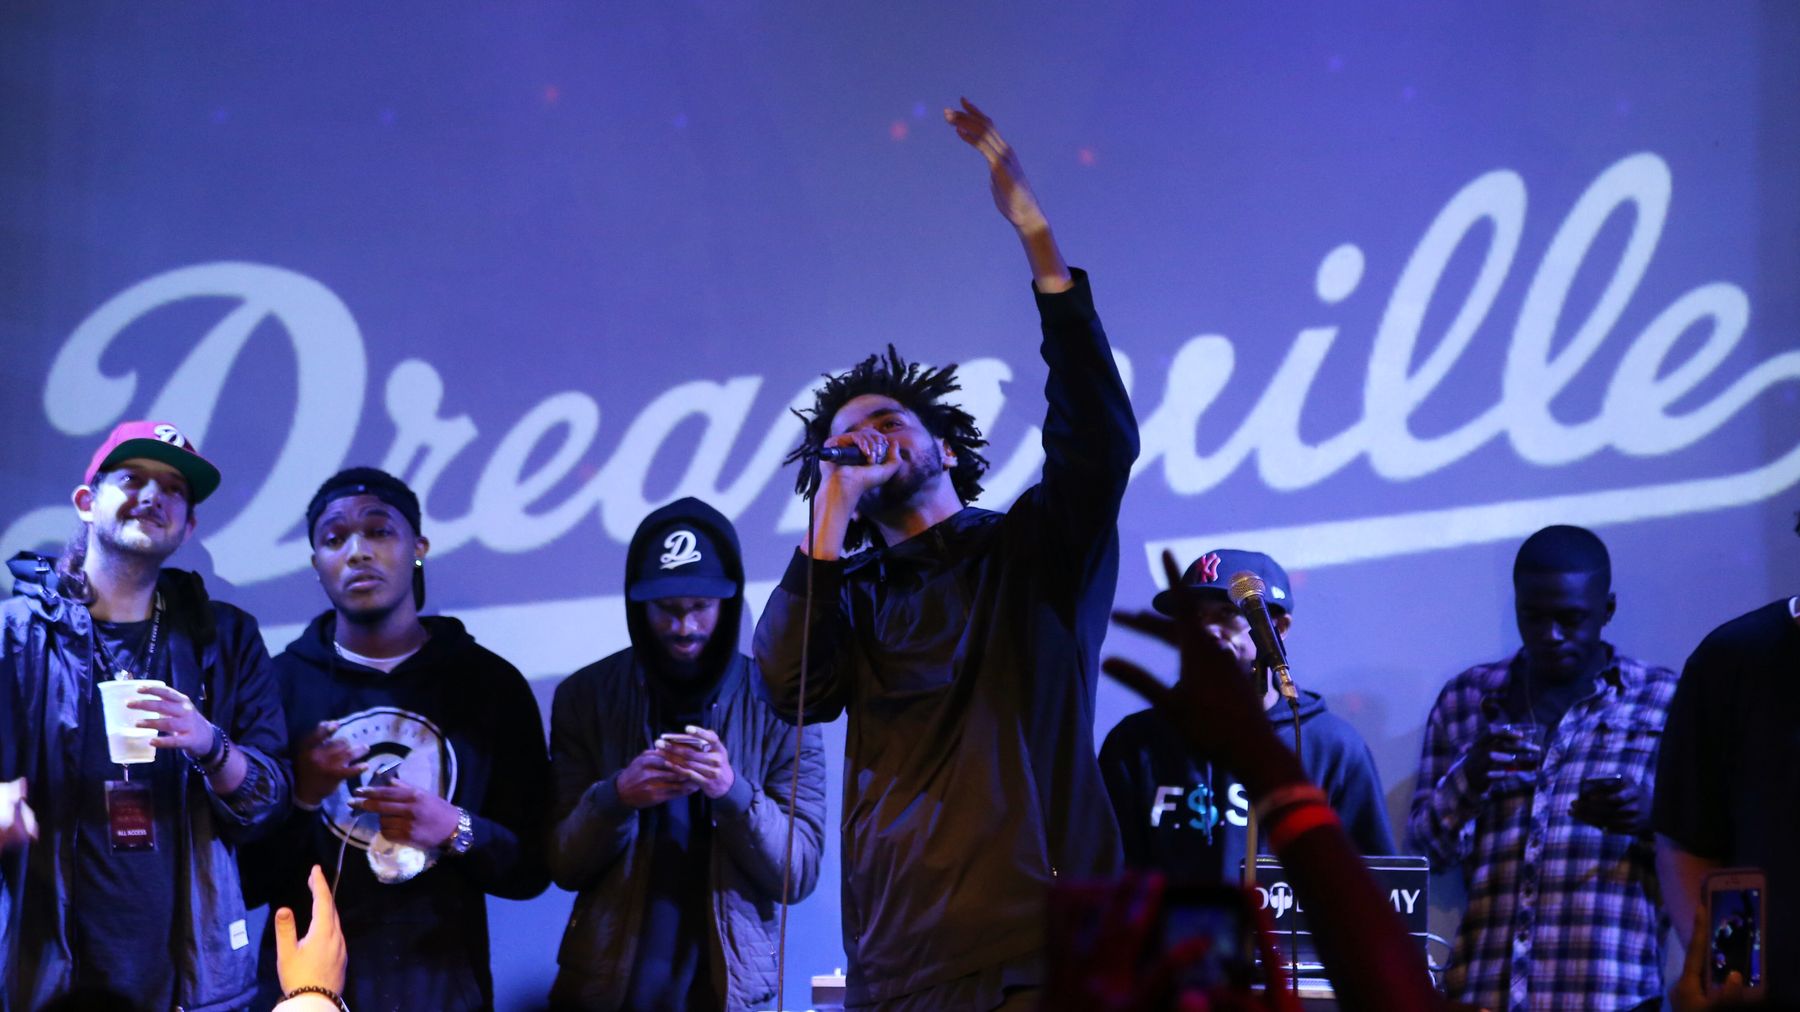 'Dreamville Festival' To Return In April 2023, Says J. Cole And Dreamville